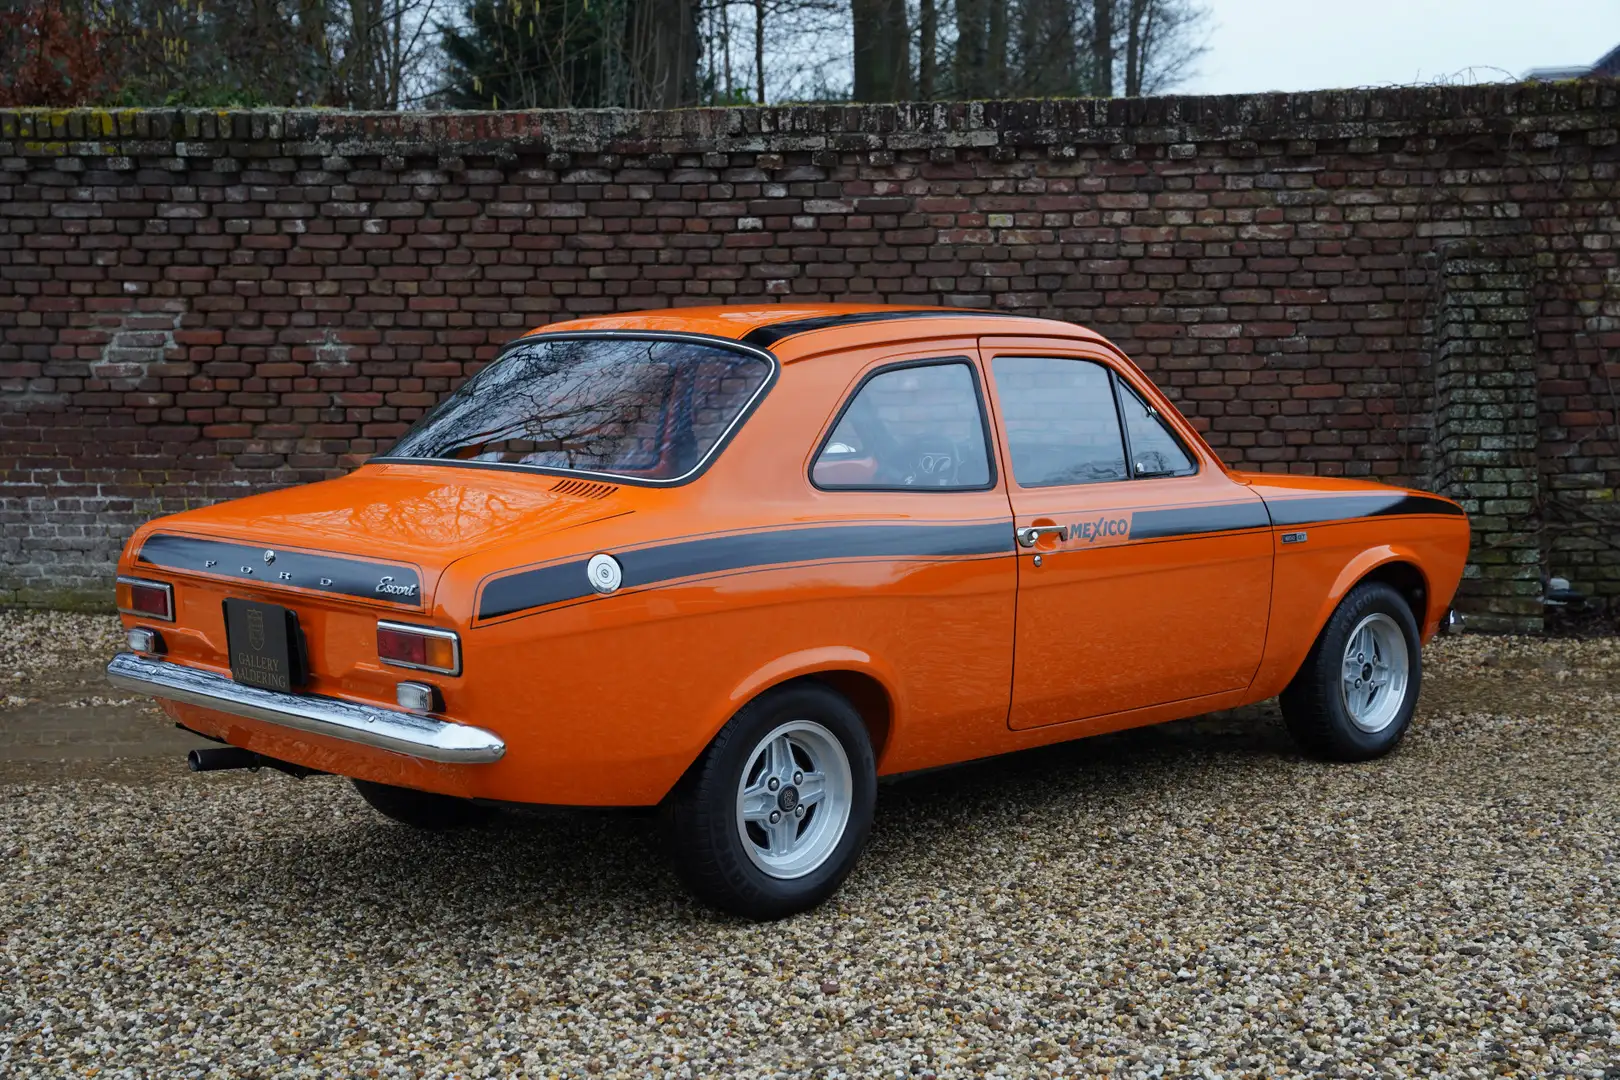 Ford Escort RS Mexico 1600 GT Mk1 Delivered new in Switzerland Orange - 2